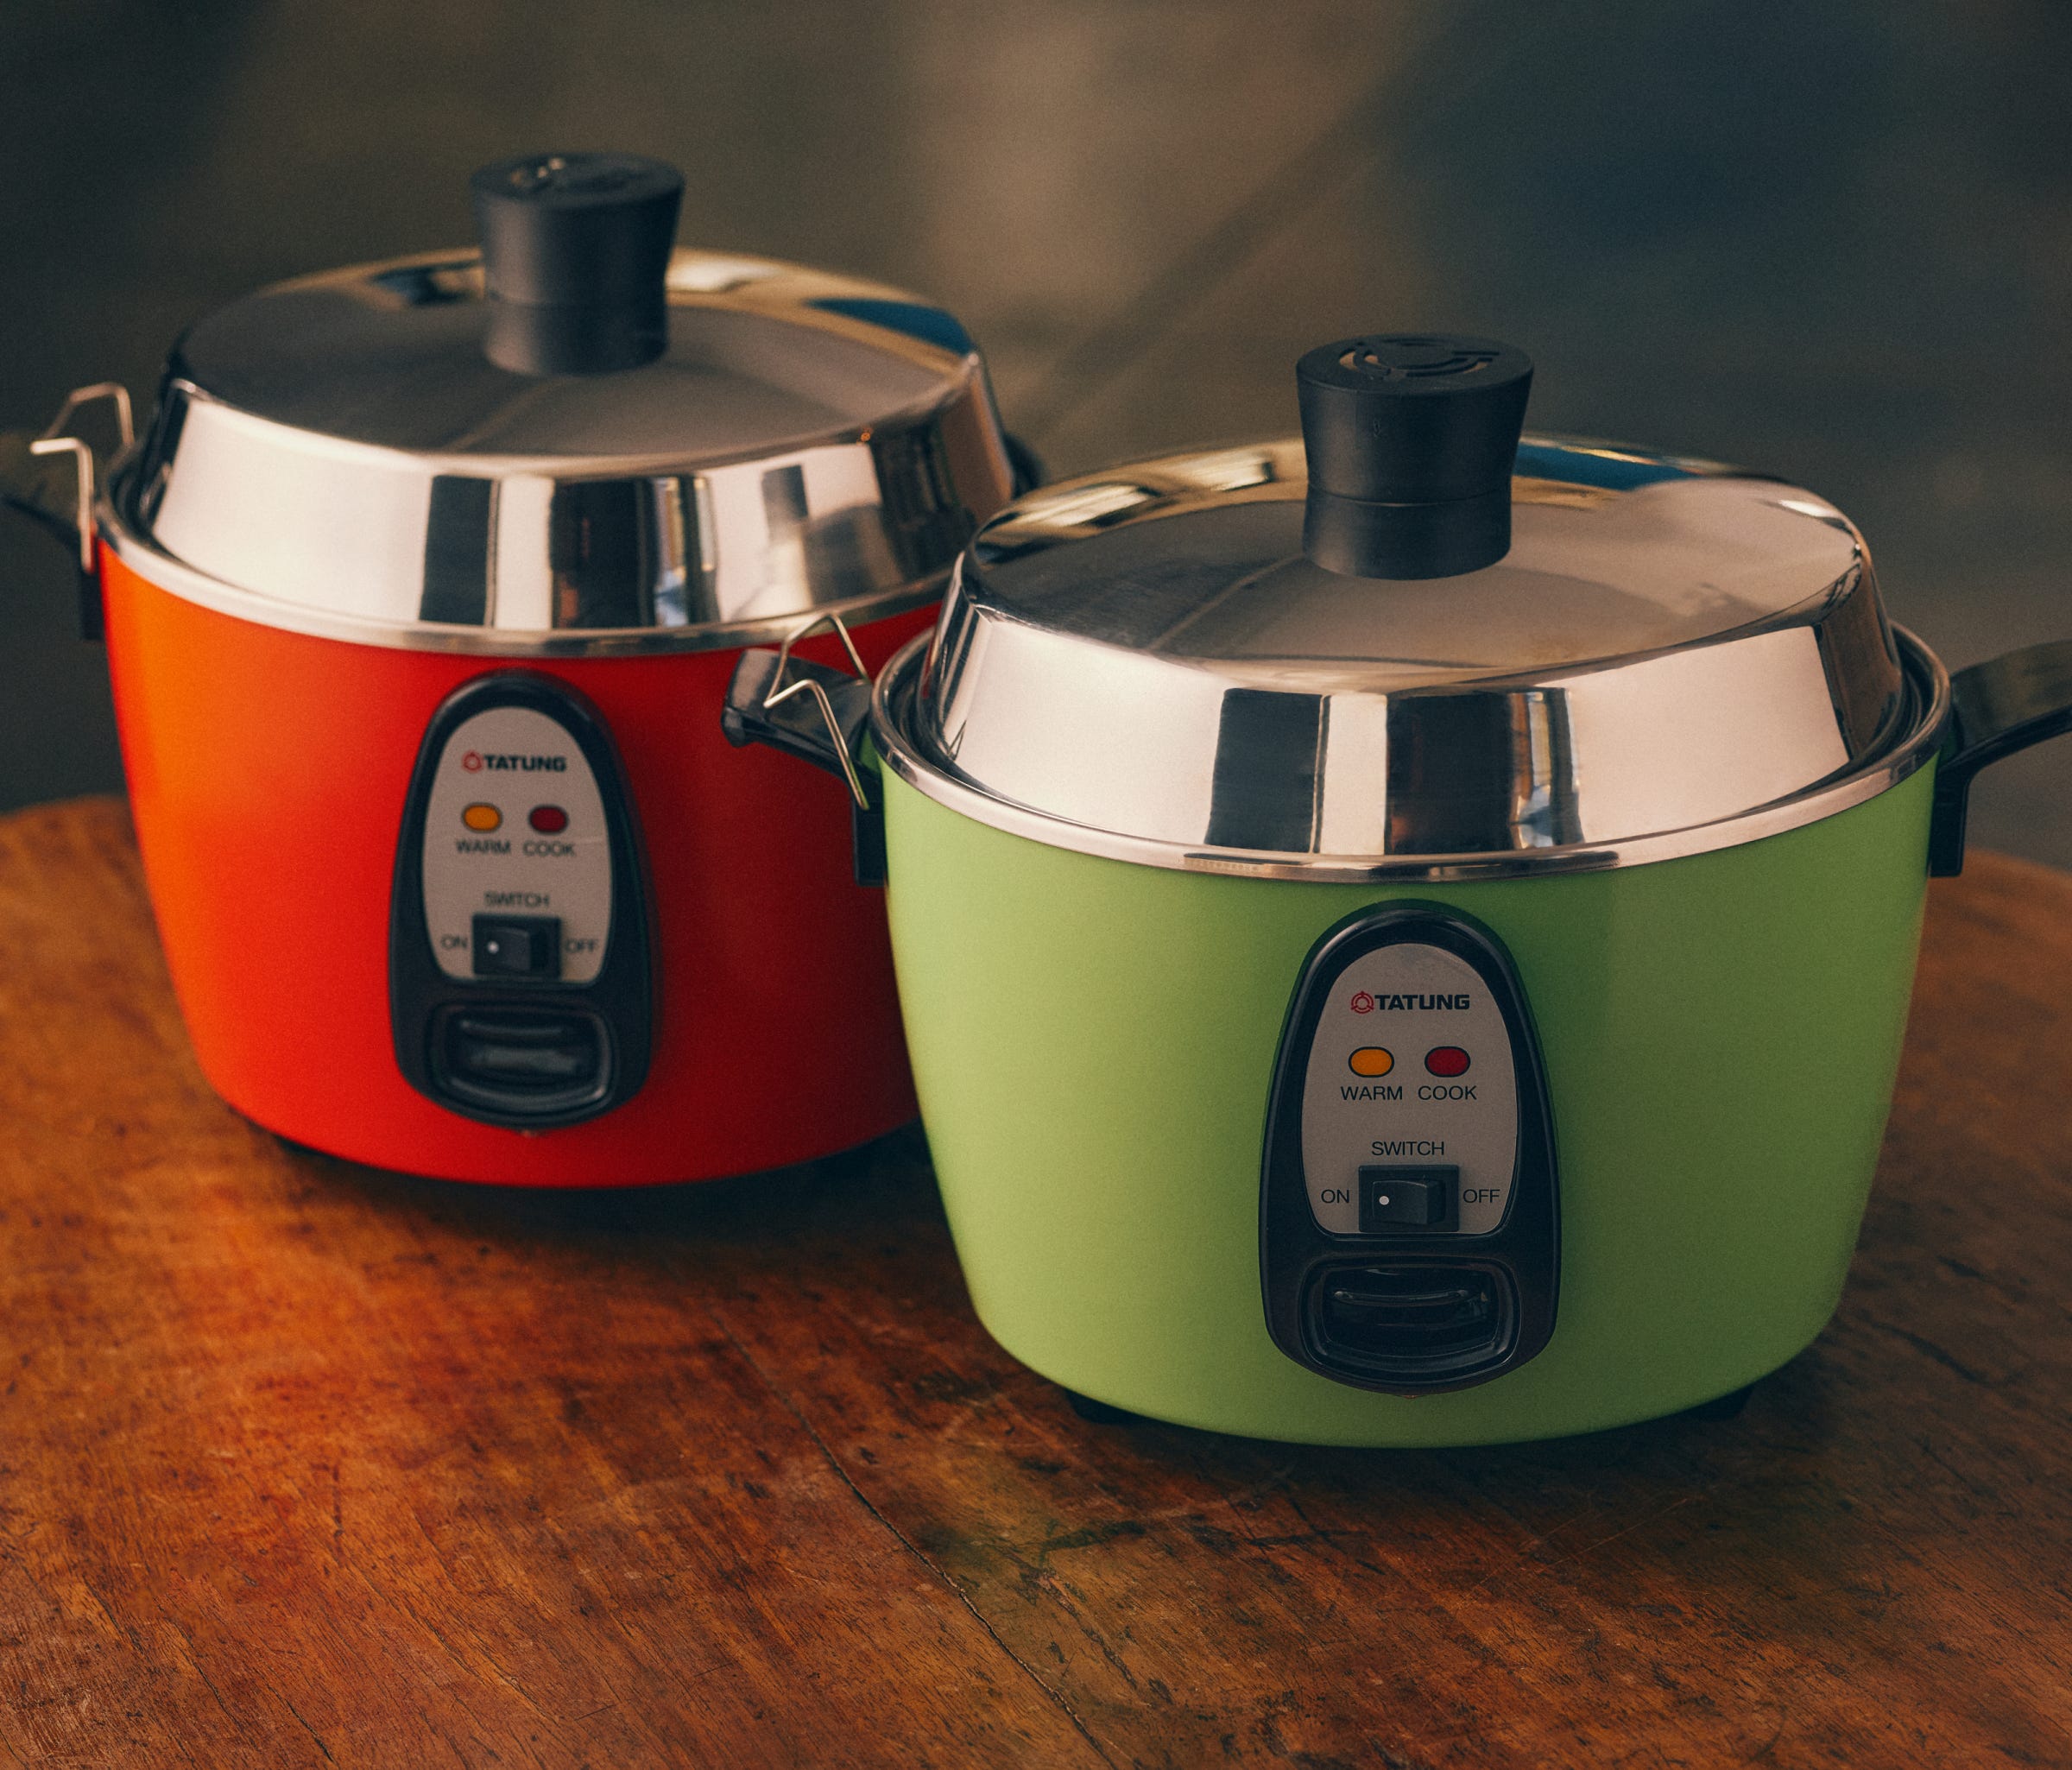 Rice Cookers & Steamers